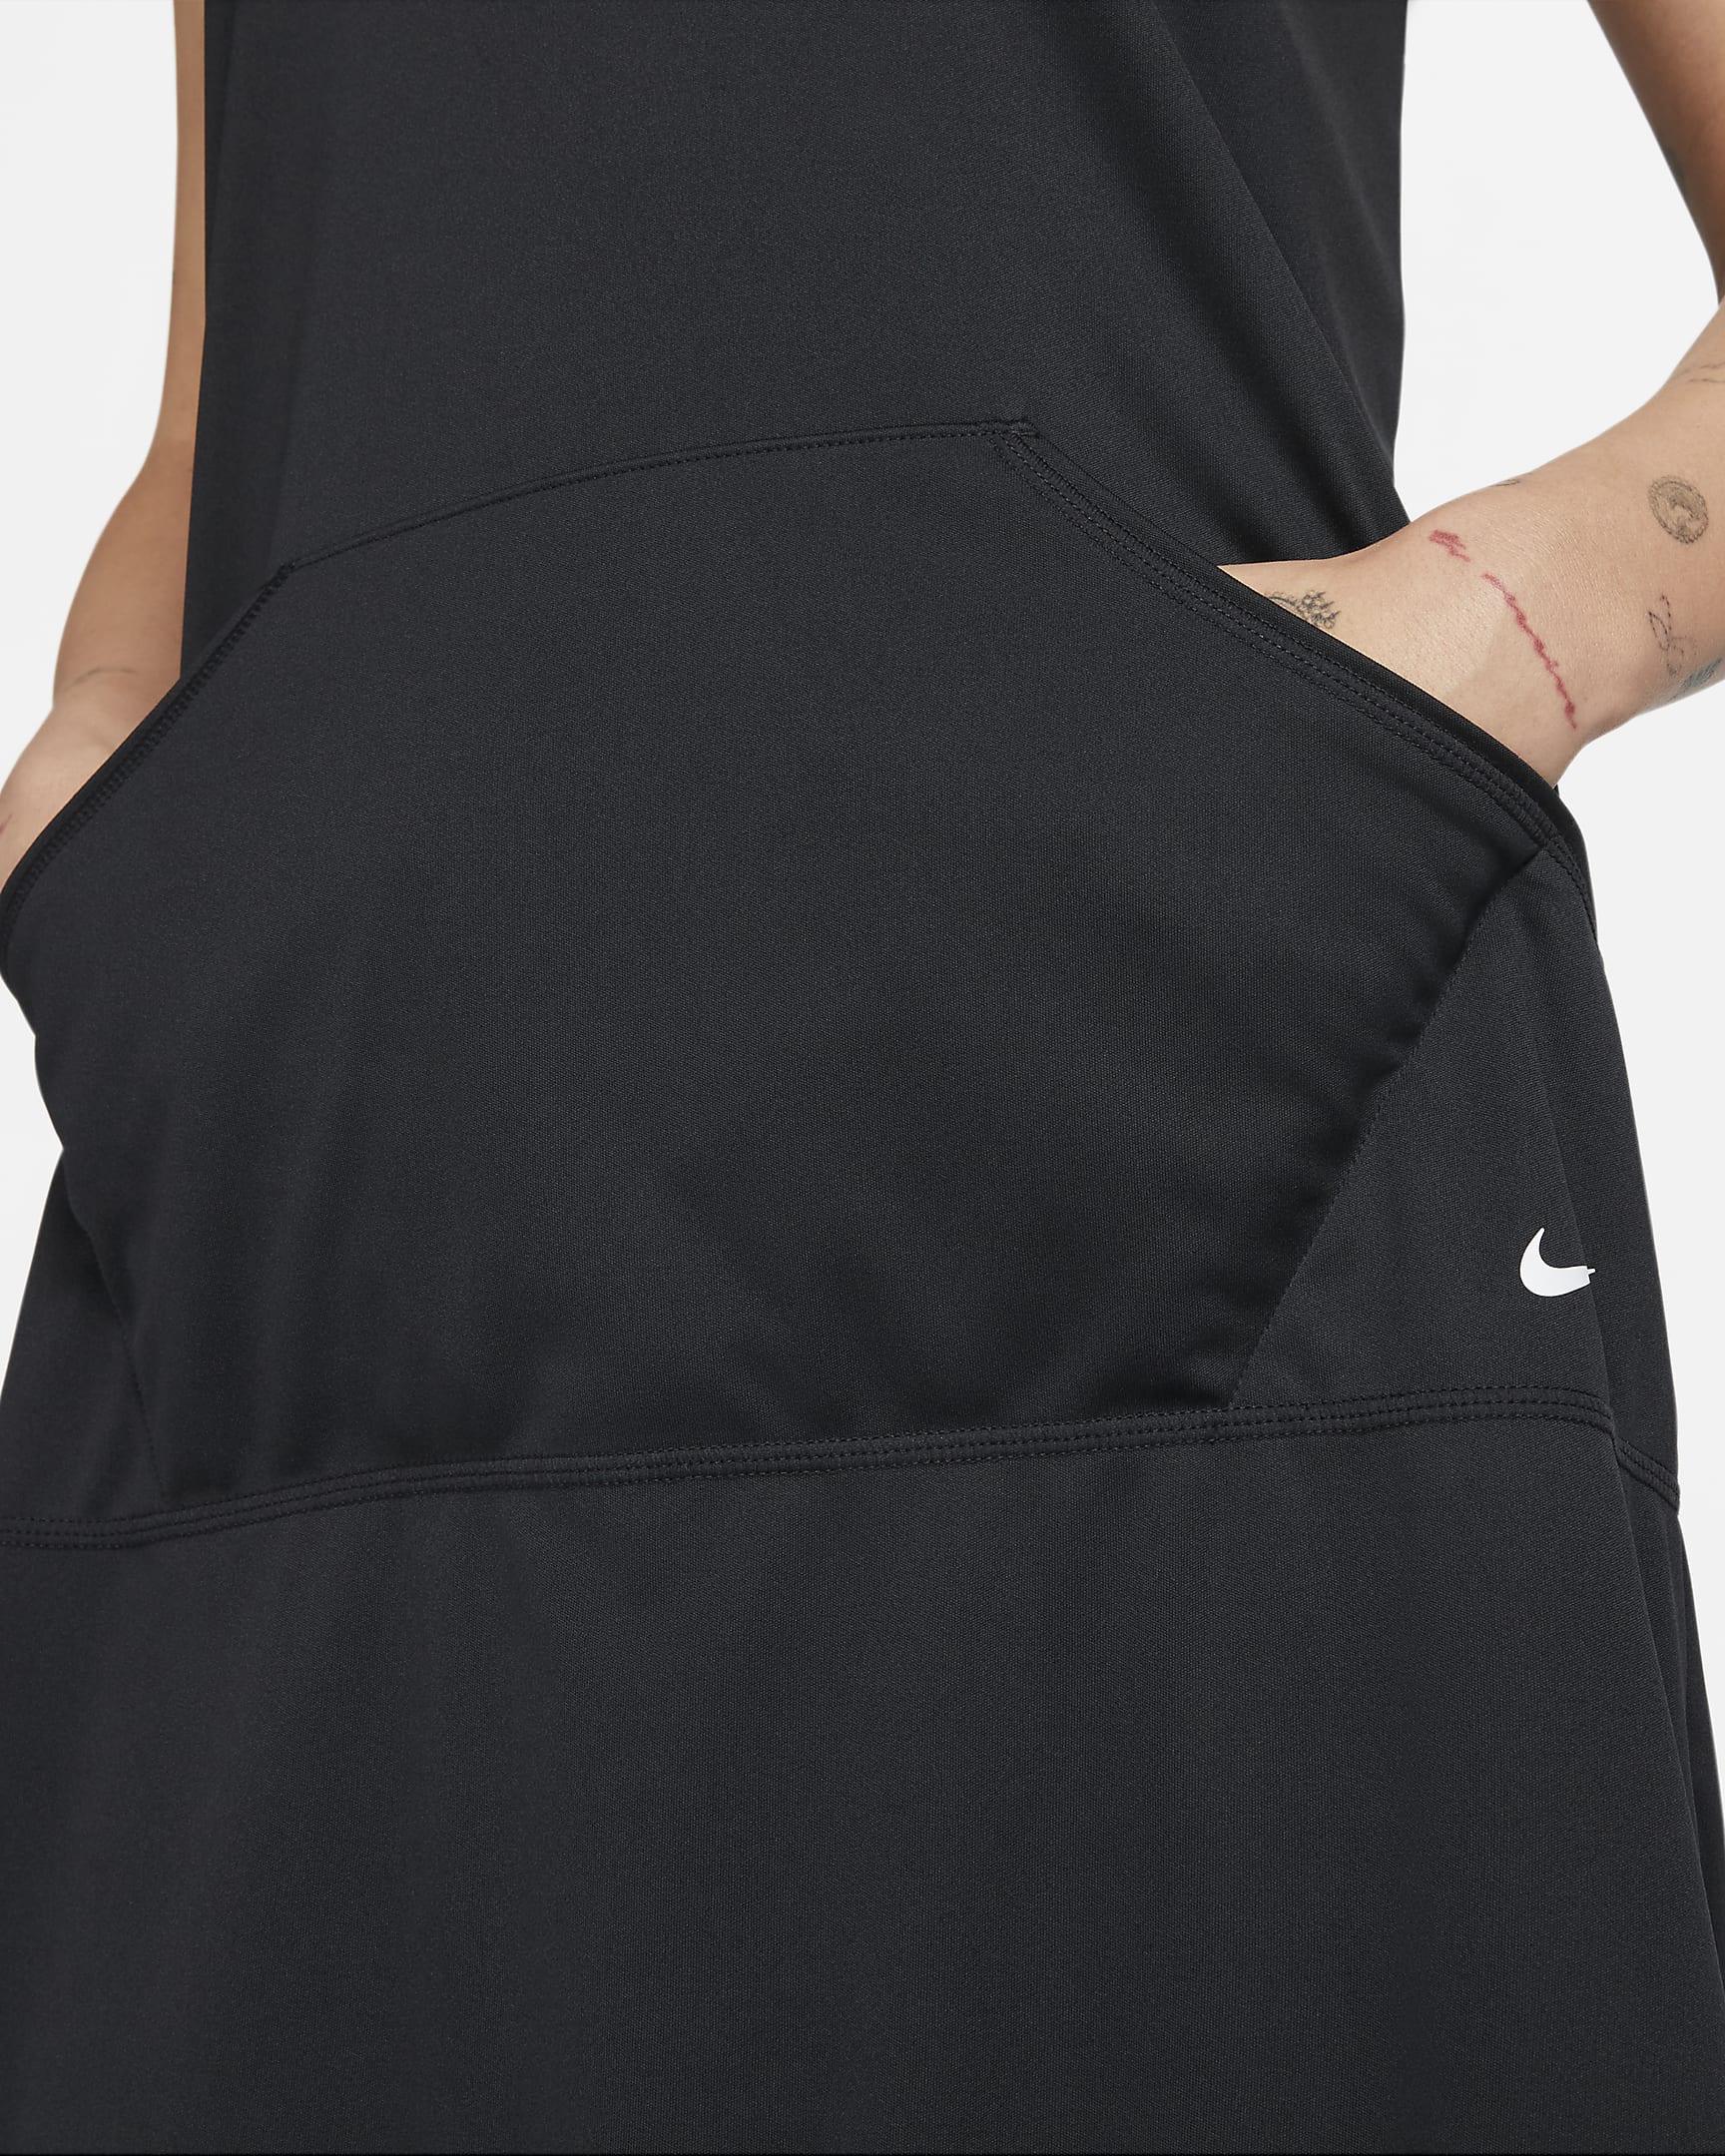 Nike Solid Cover-Up Women's Hooded Dress. Nike.com